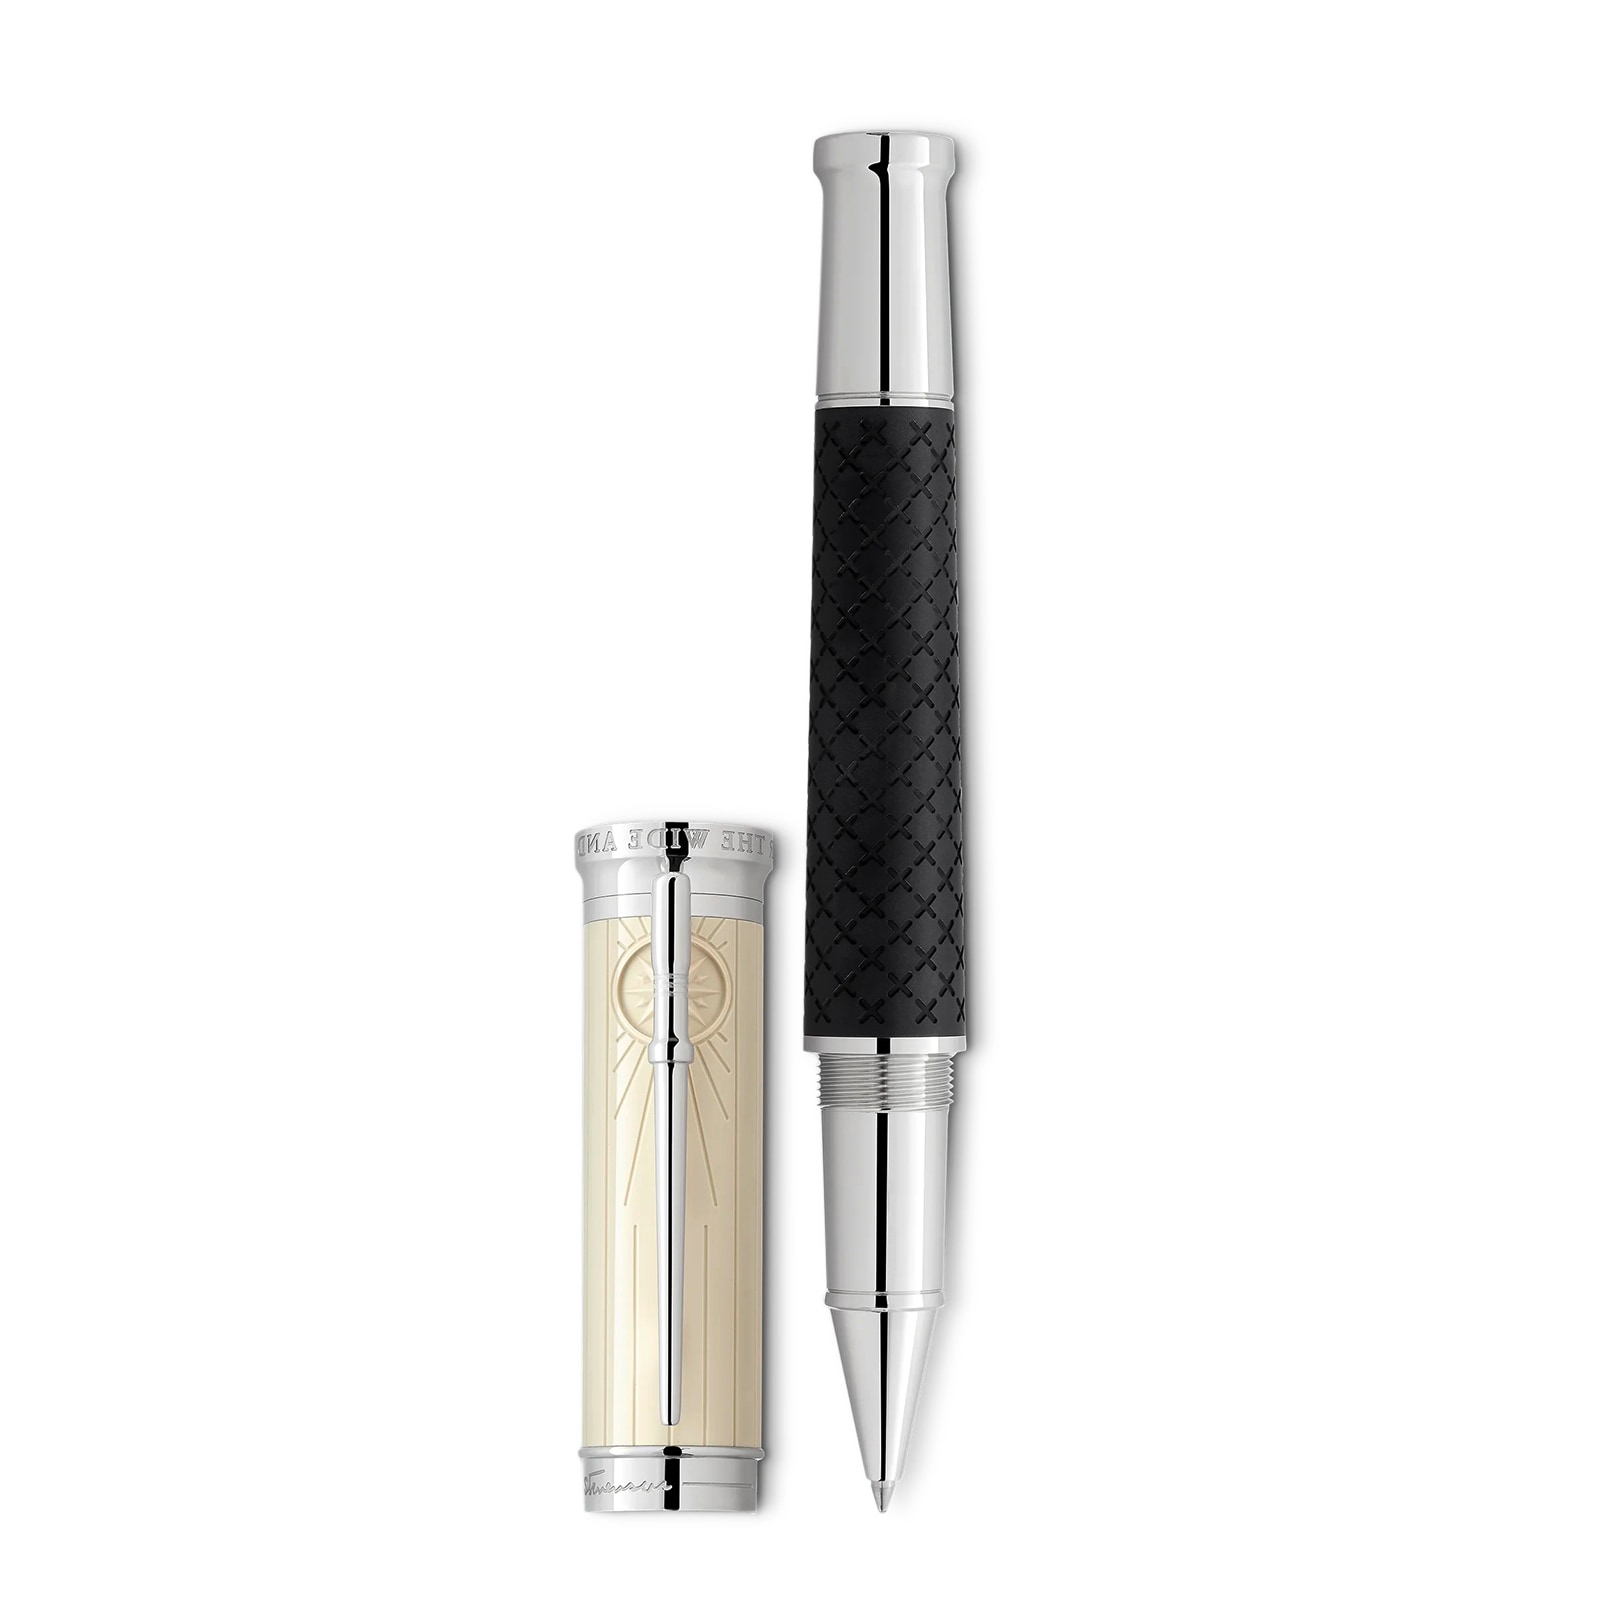 Writers Edition Homage to Robert Louis Stevenson Limited Edition Rollerball Pen